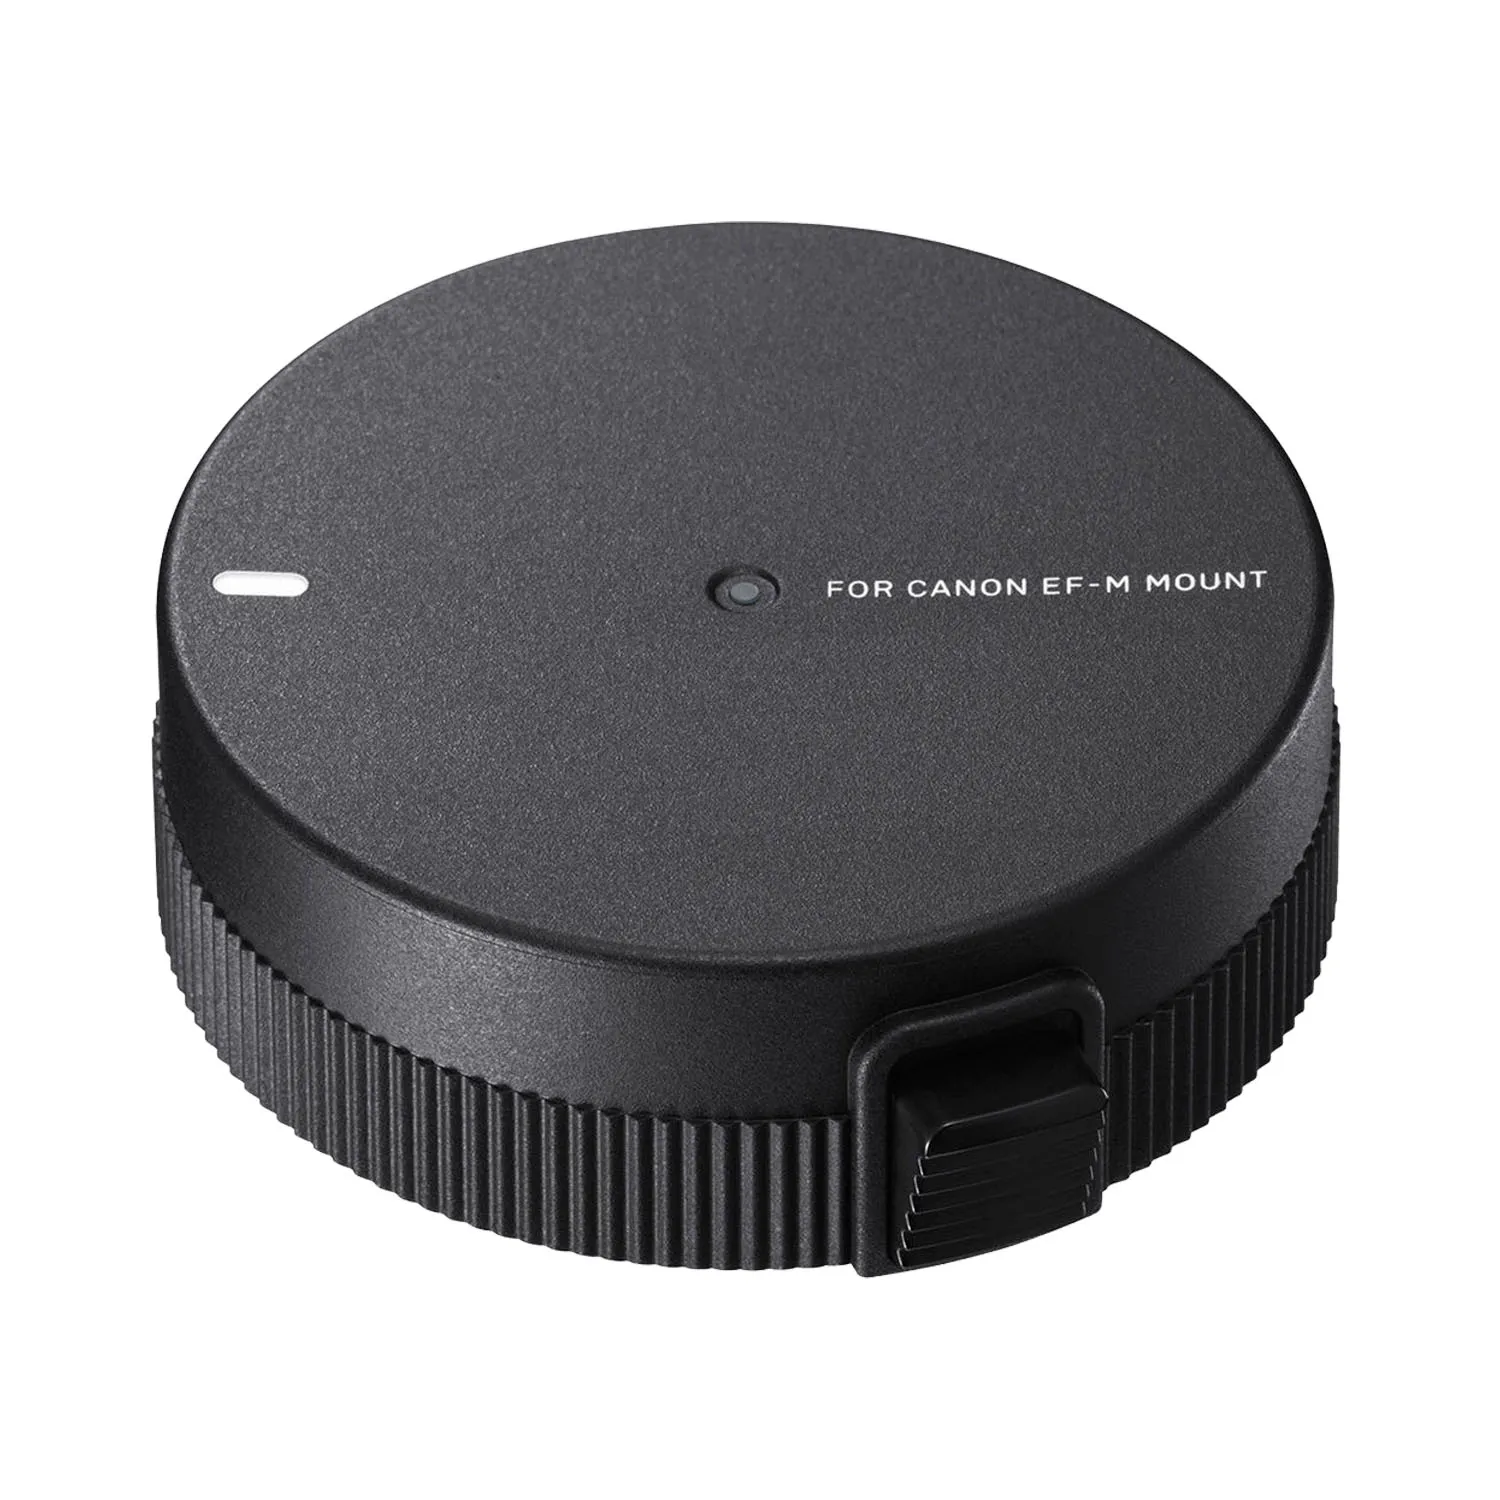 Sigma UD-11 USB Dock for Canon EF-M mount